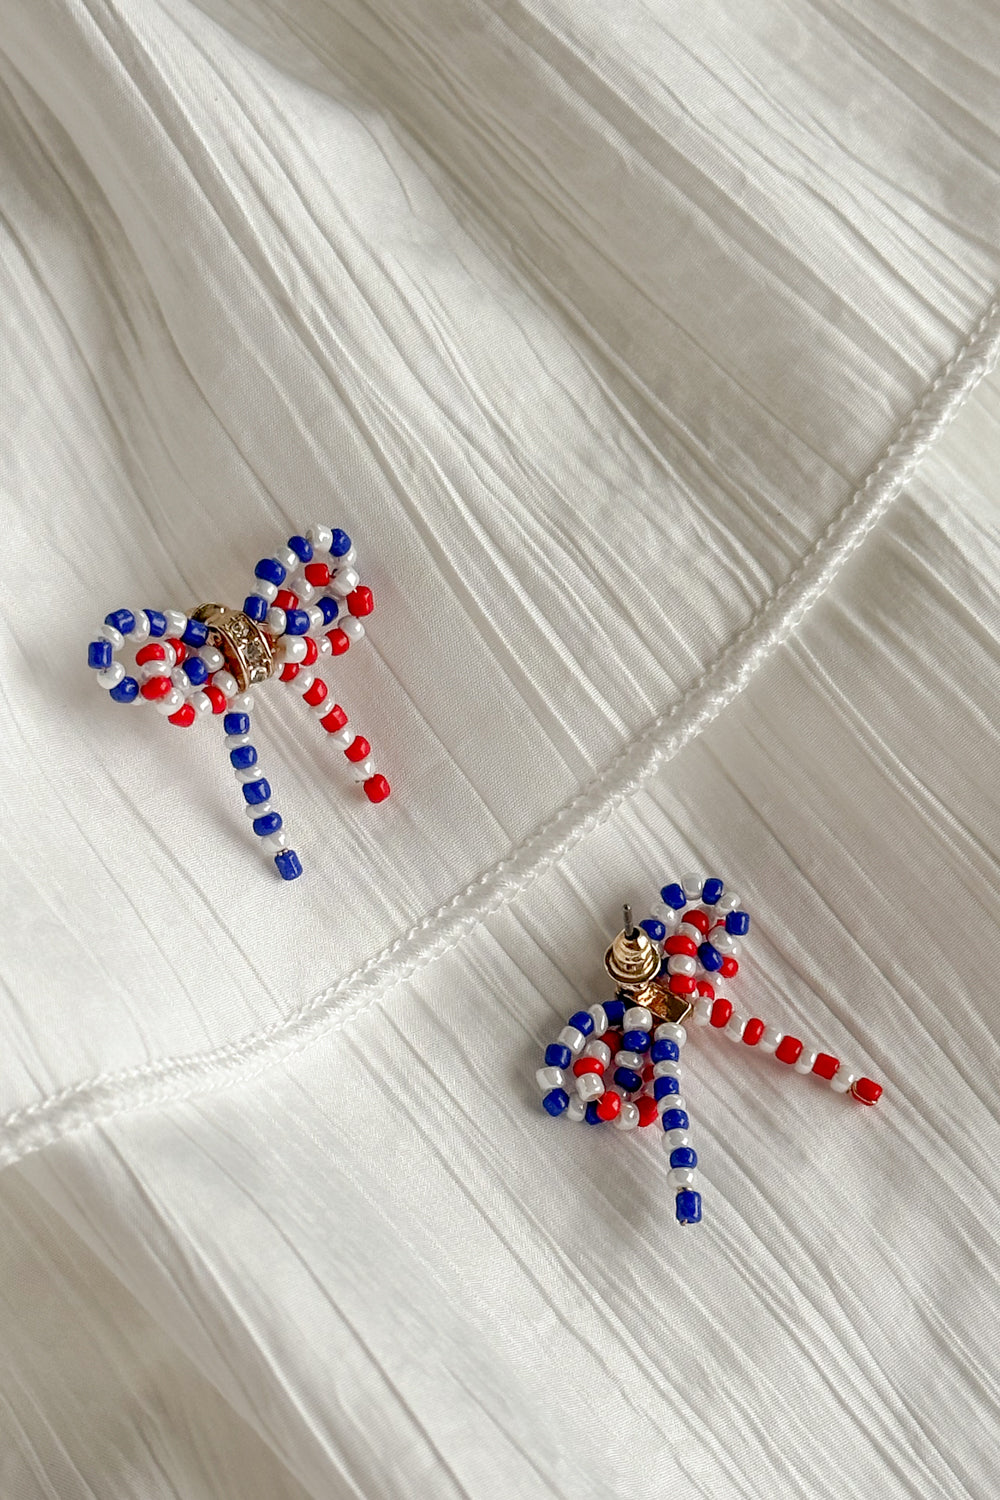 Image shows Quinn Red, White, & Blue Bow Earrings against a white background. Earrings have red white and blue beads in the shape of a bow, and the center is gold with rhinestones. 1 earring face down in image